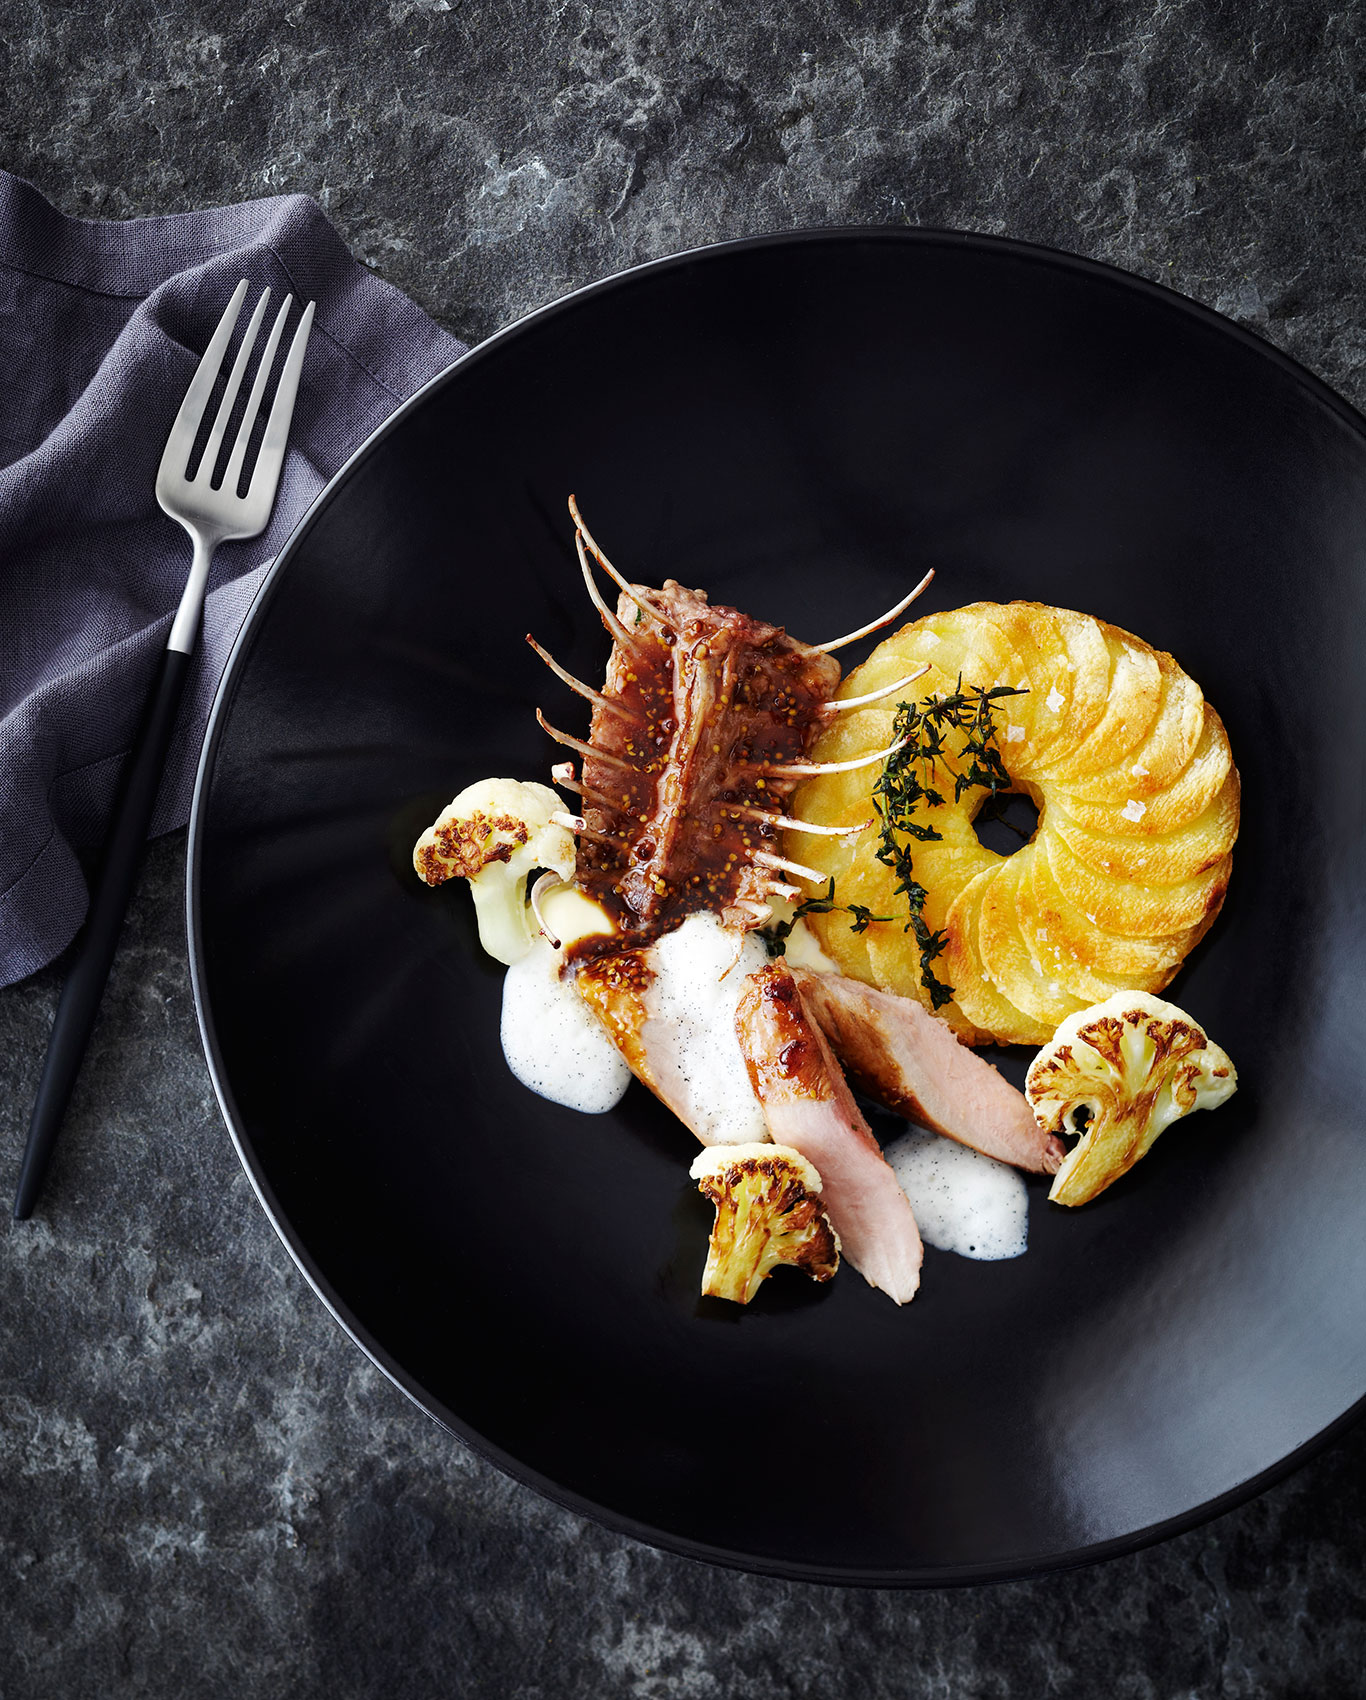 Southon Cooking • The Foodstore Rabbit with Grilled Cauliflower & Potato • Hospitality & Editorial Food Photography